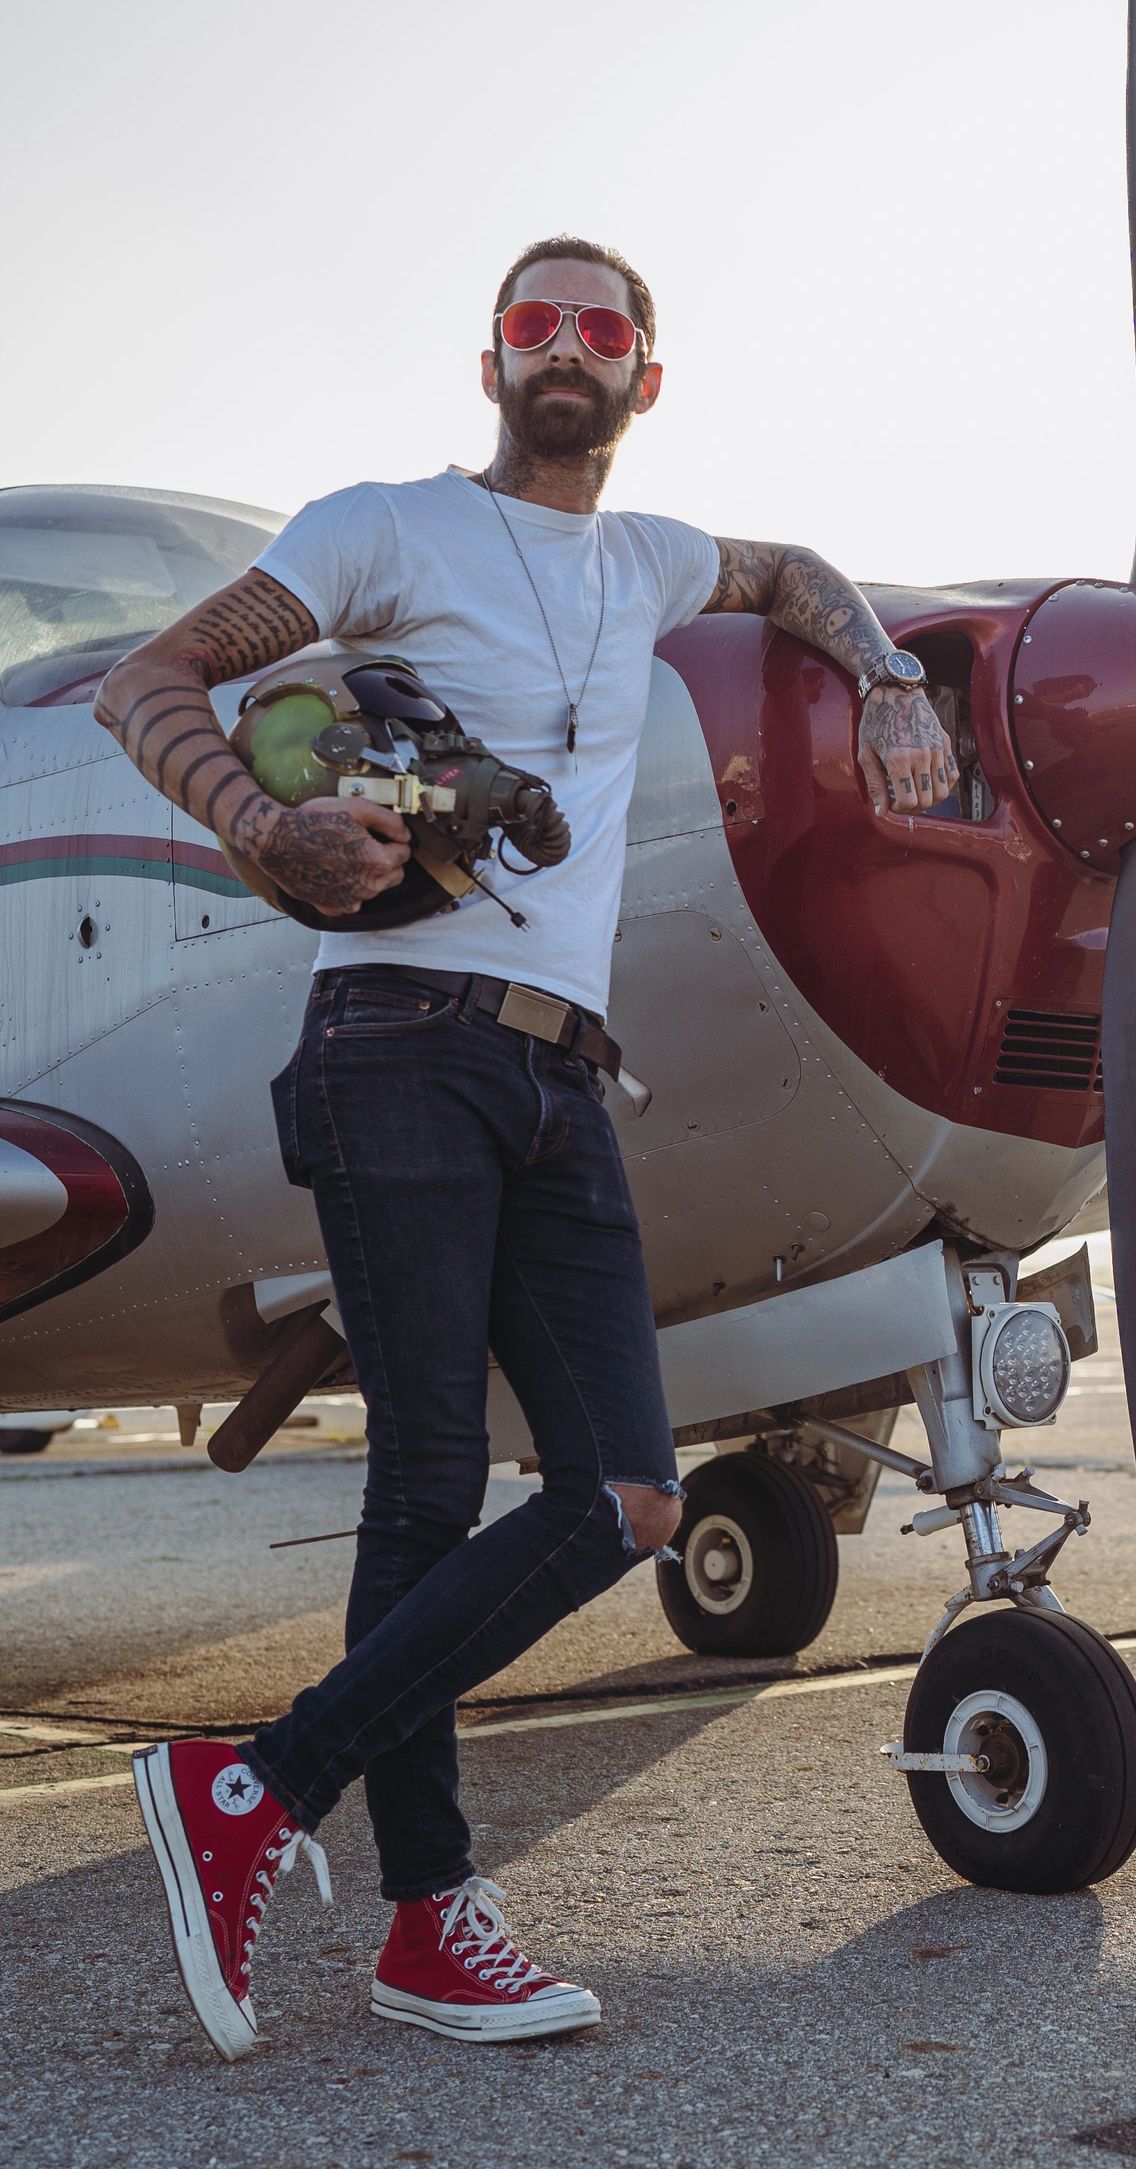 Male model with sunglasses leaning on aircraft